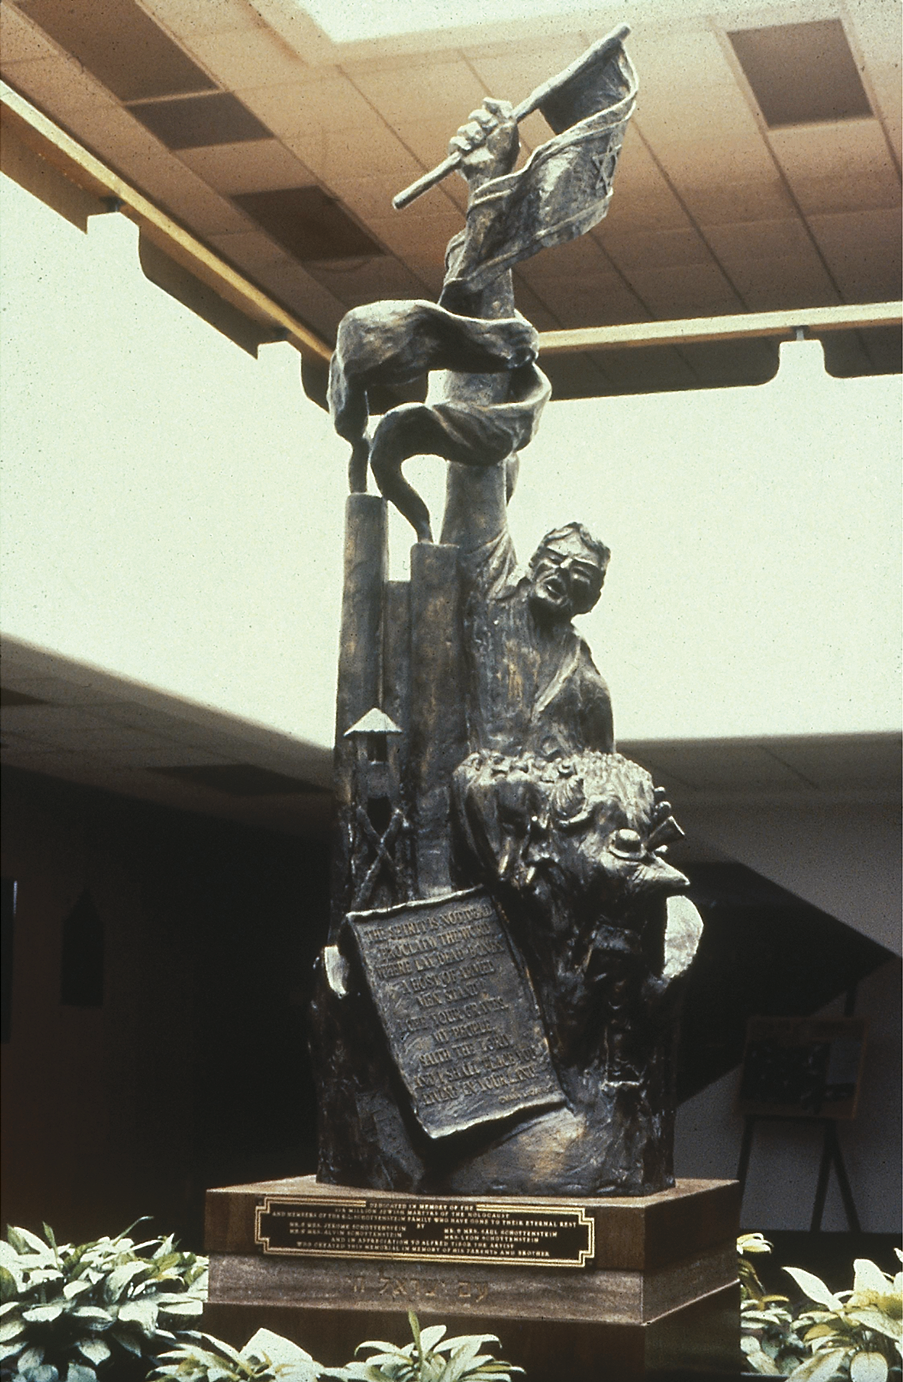 Photograph of sculpture in an atrium depicting man in labor camp with arm raised holding a flag. 